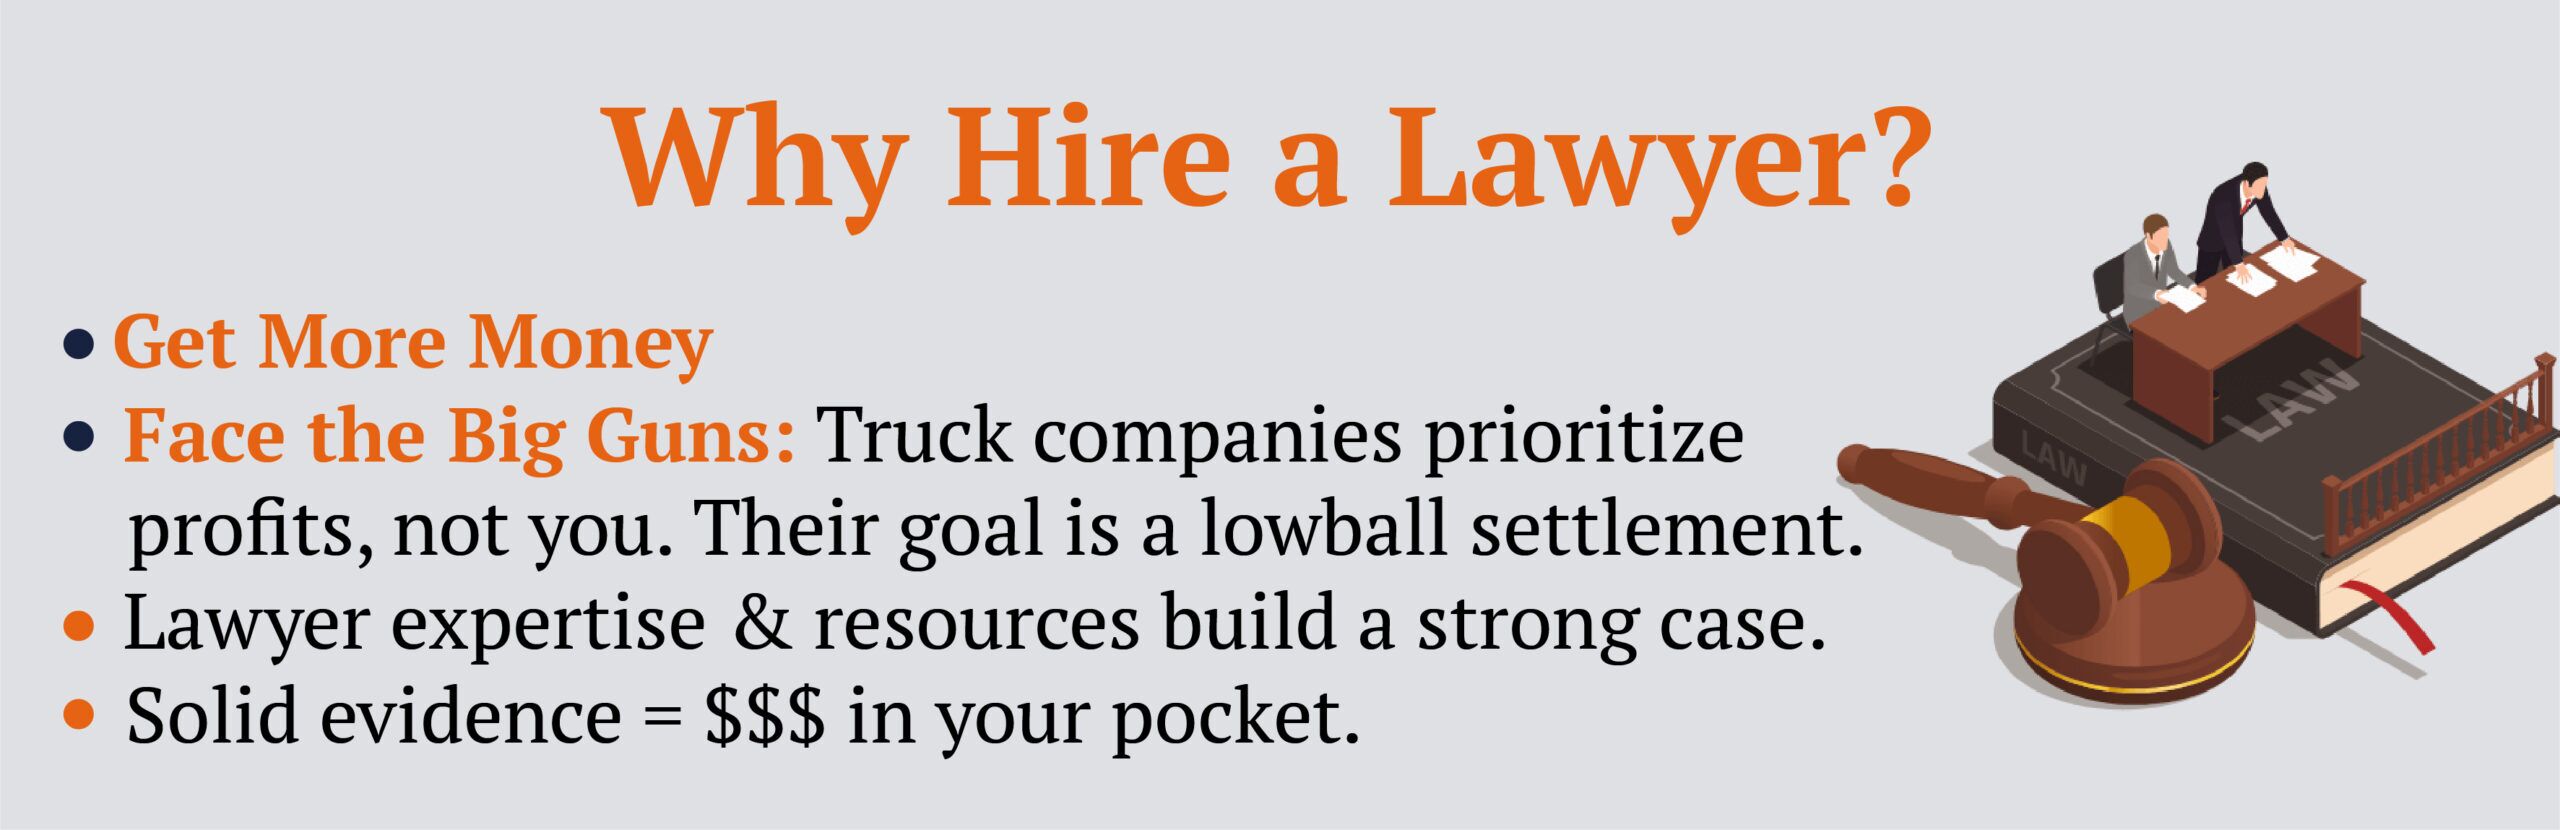 Why hire a lawyer